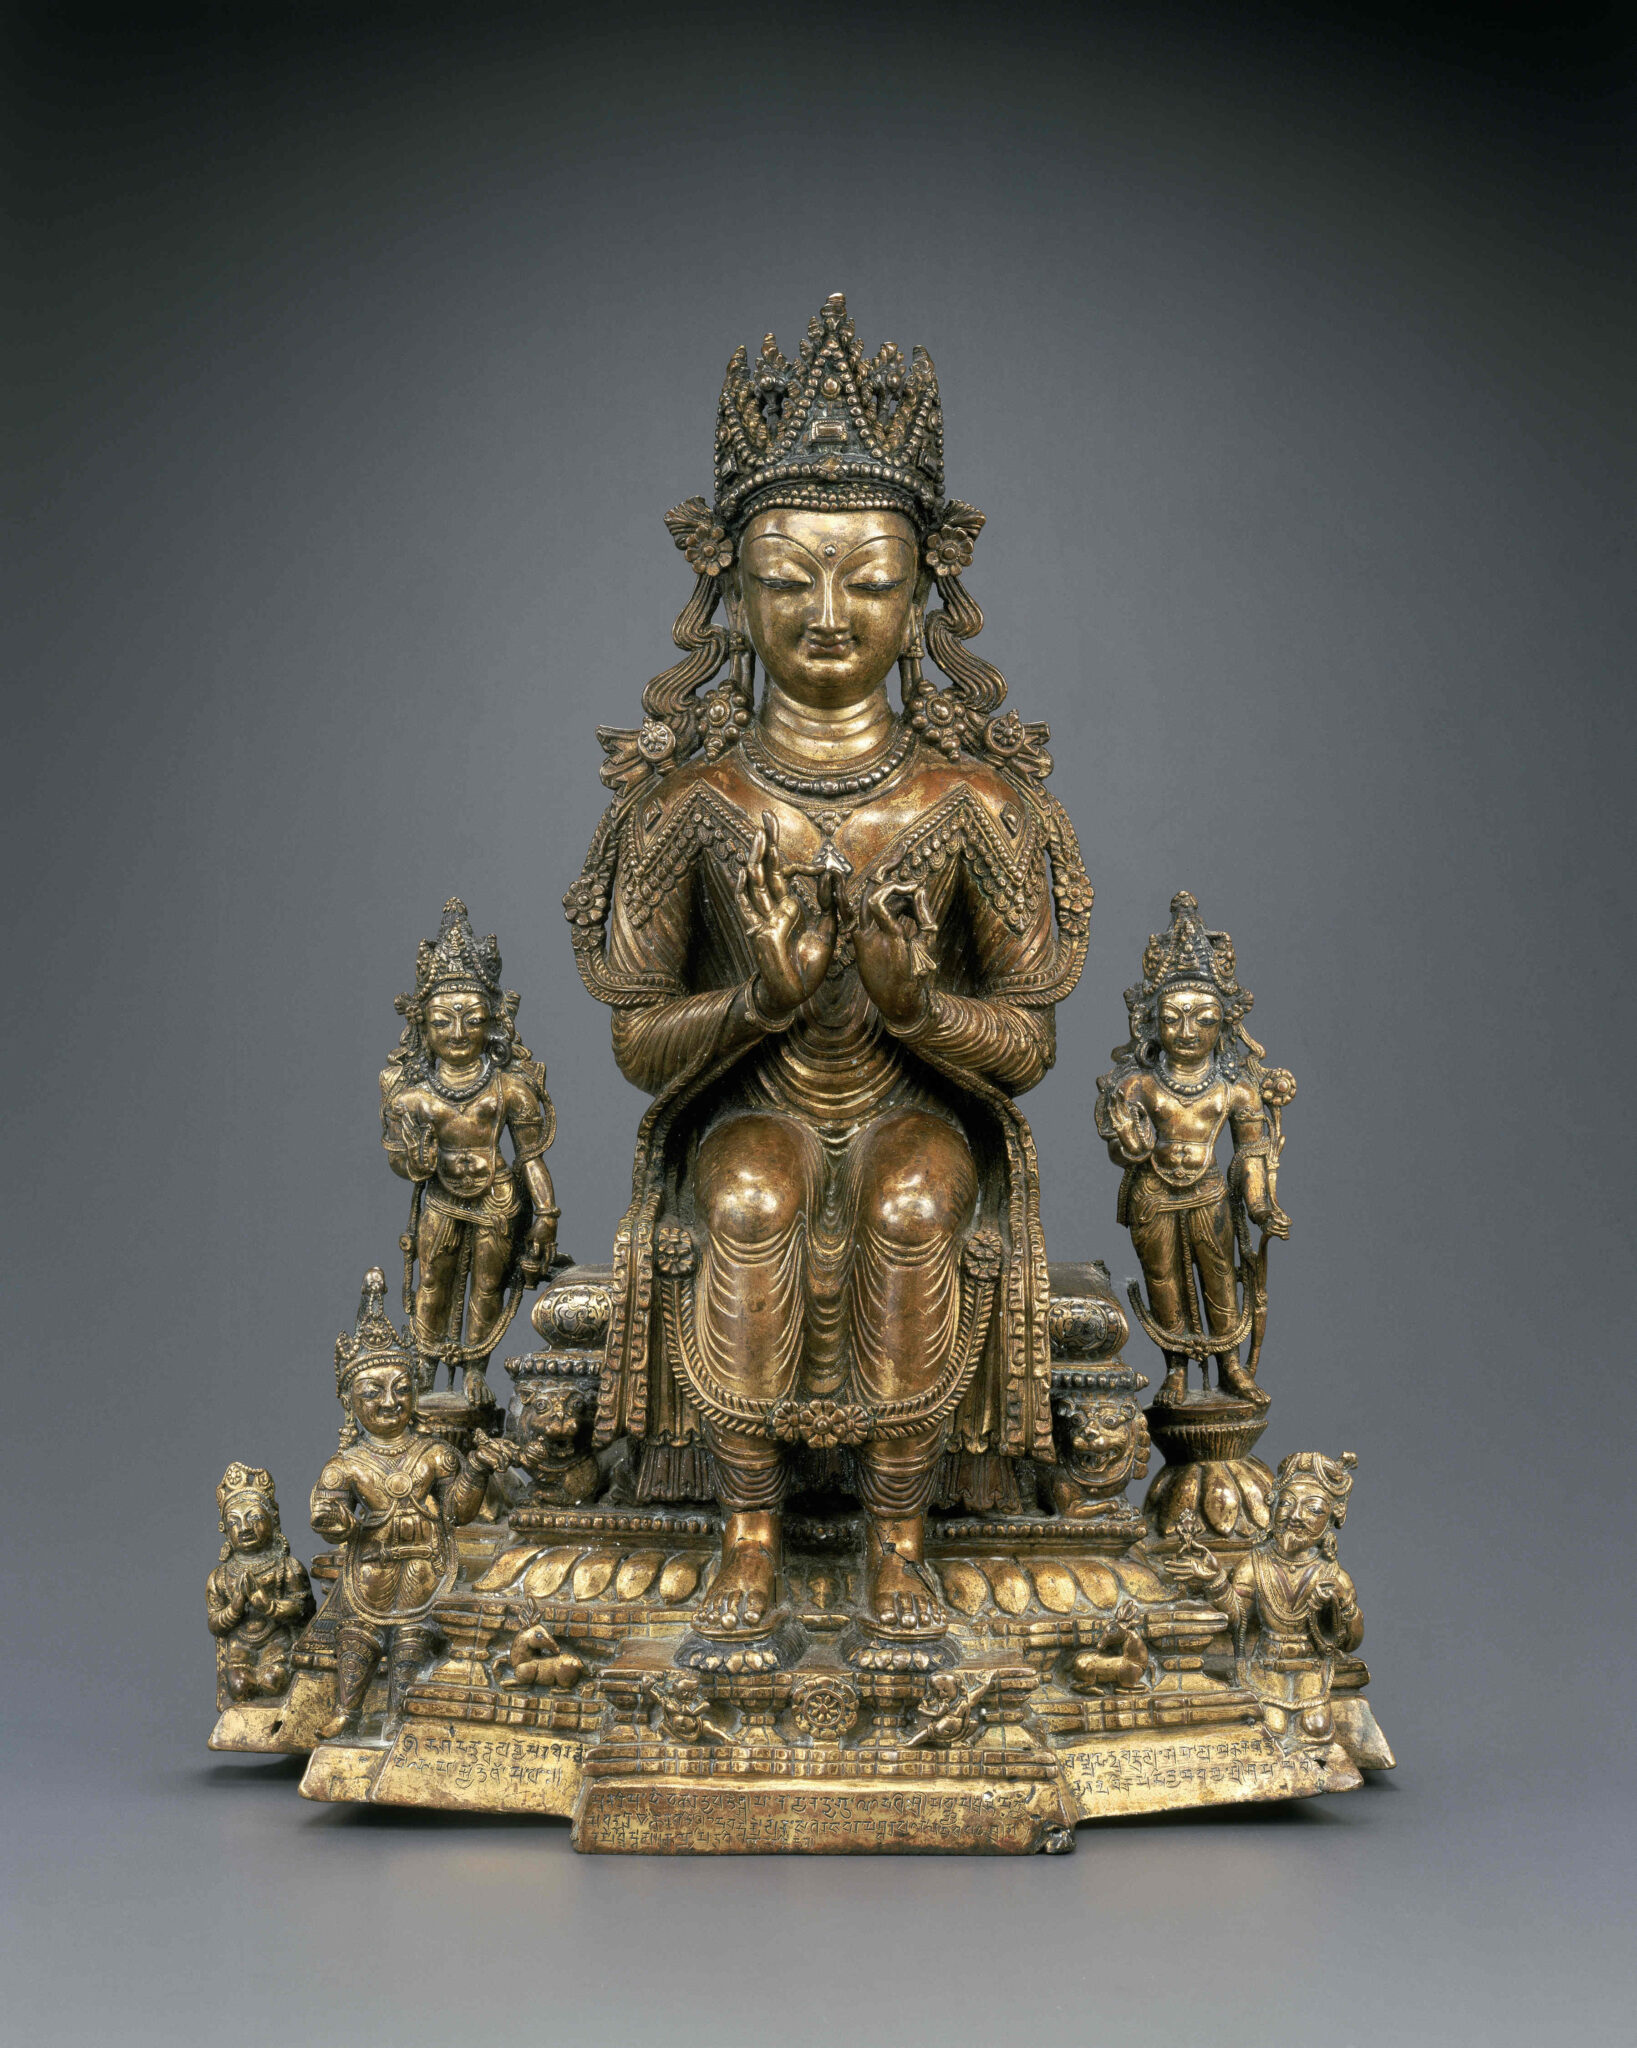 Intricately detailed brass statuette of enthroned Buddha flanked by five smaller deities